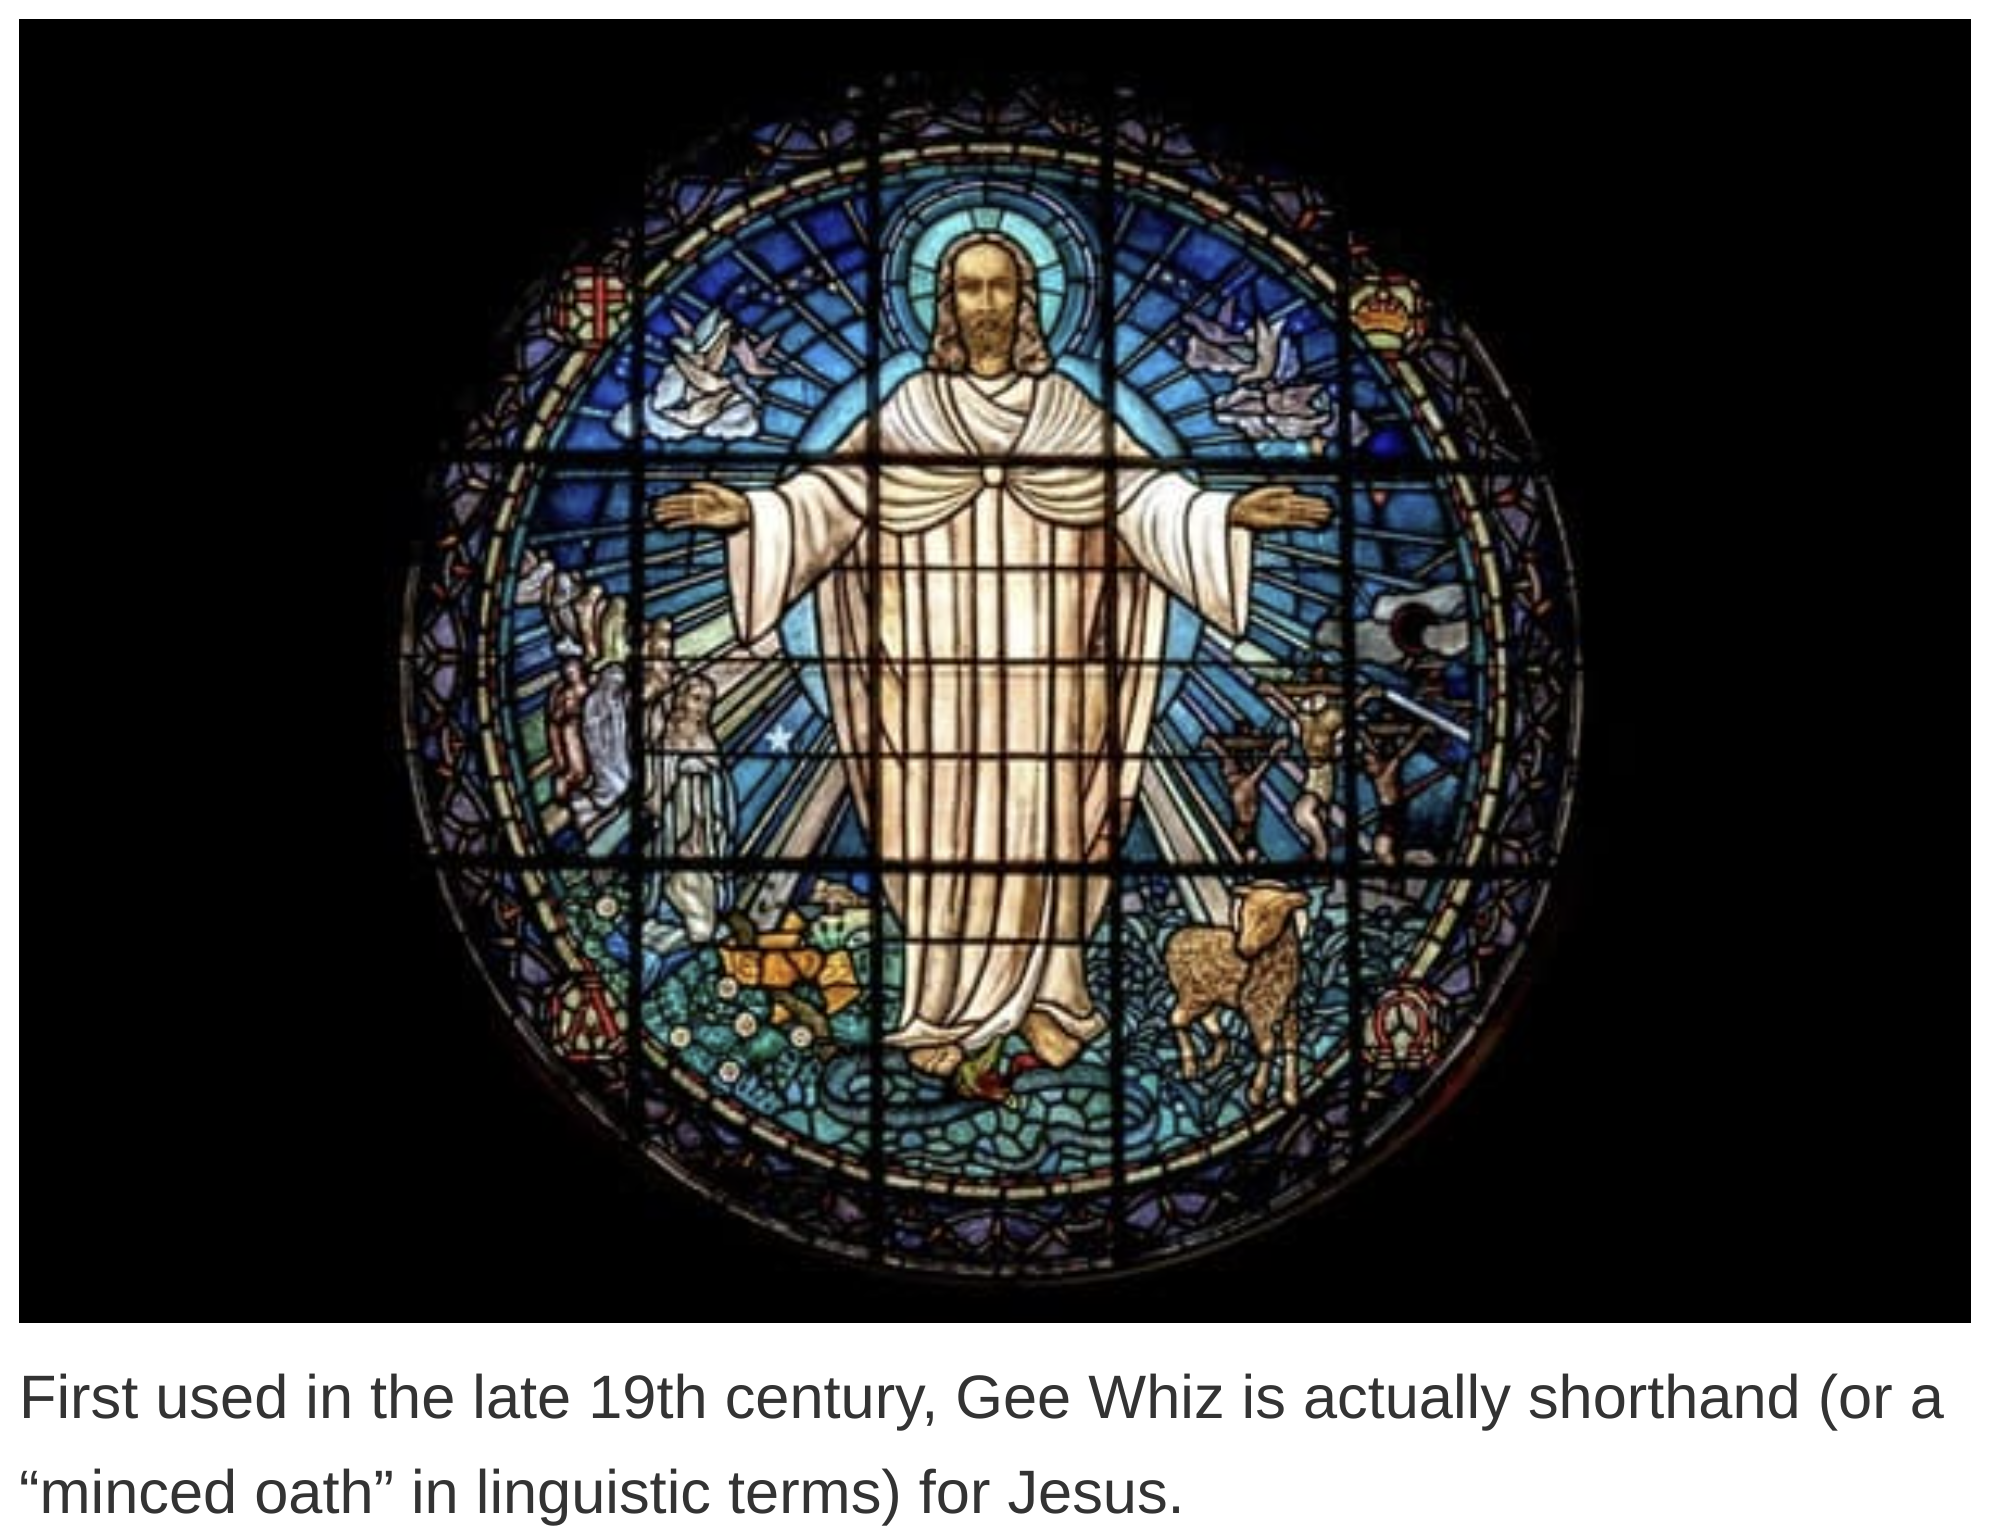 etymology english language - First used in the late 19th century, Gee Whiz is actually shorthand or a